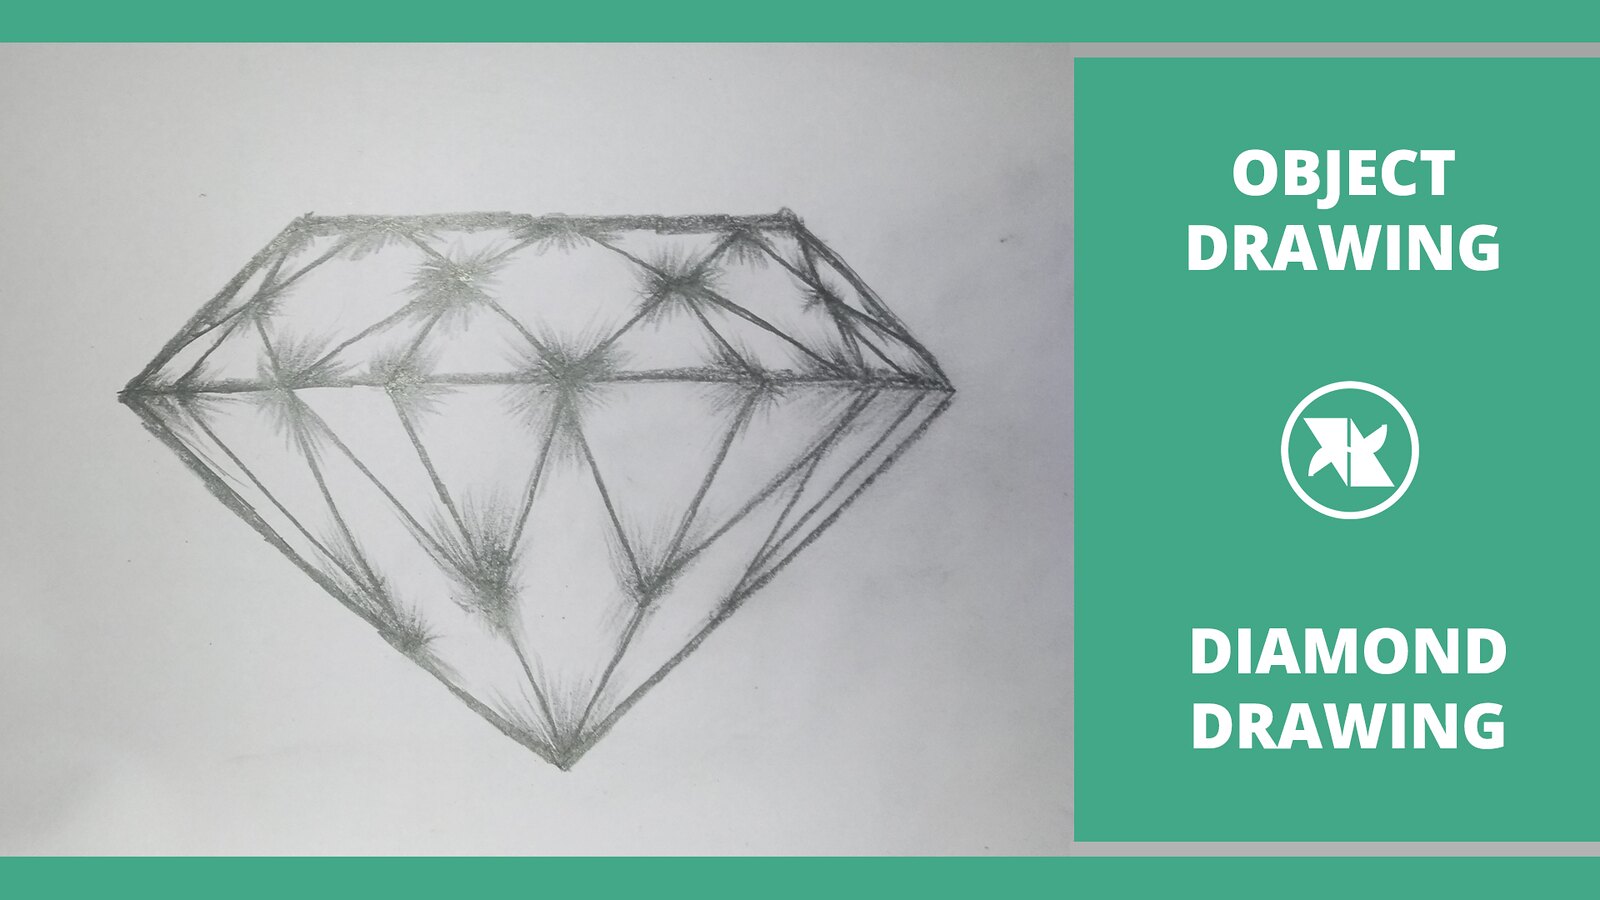 How To Draw A Diamond Step By Step - Diamond Drawing EASY - Super Easy  Drawing Tutorials - YouTube